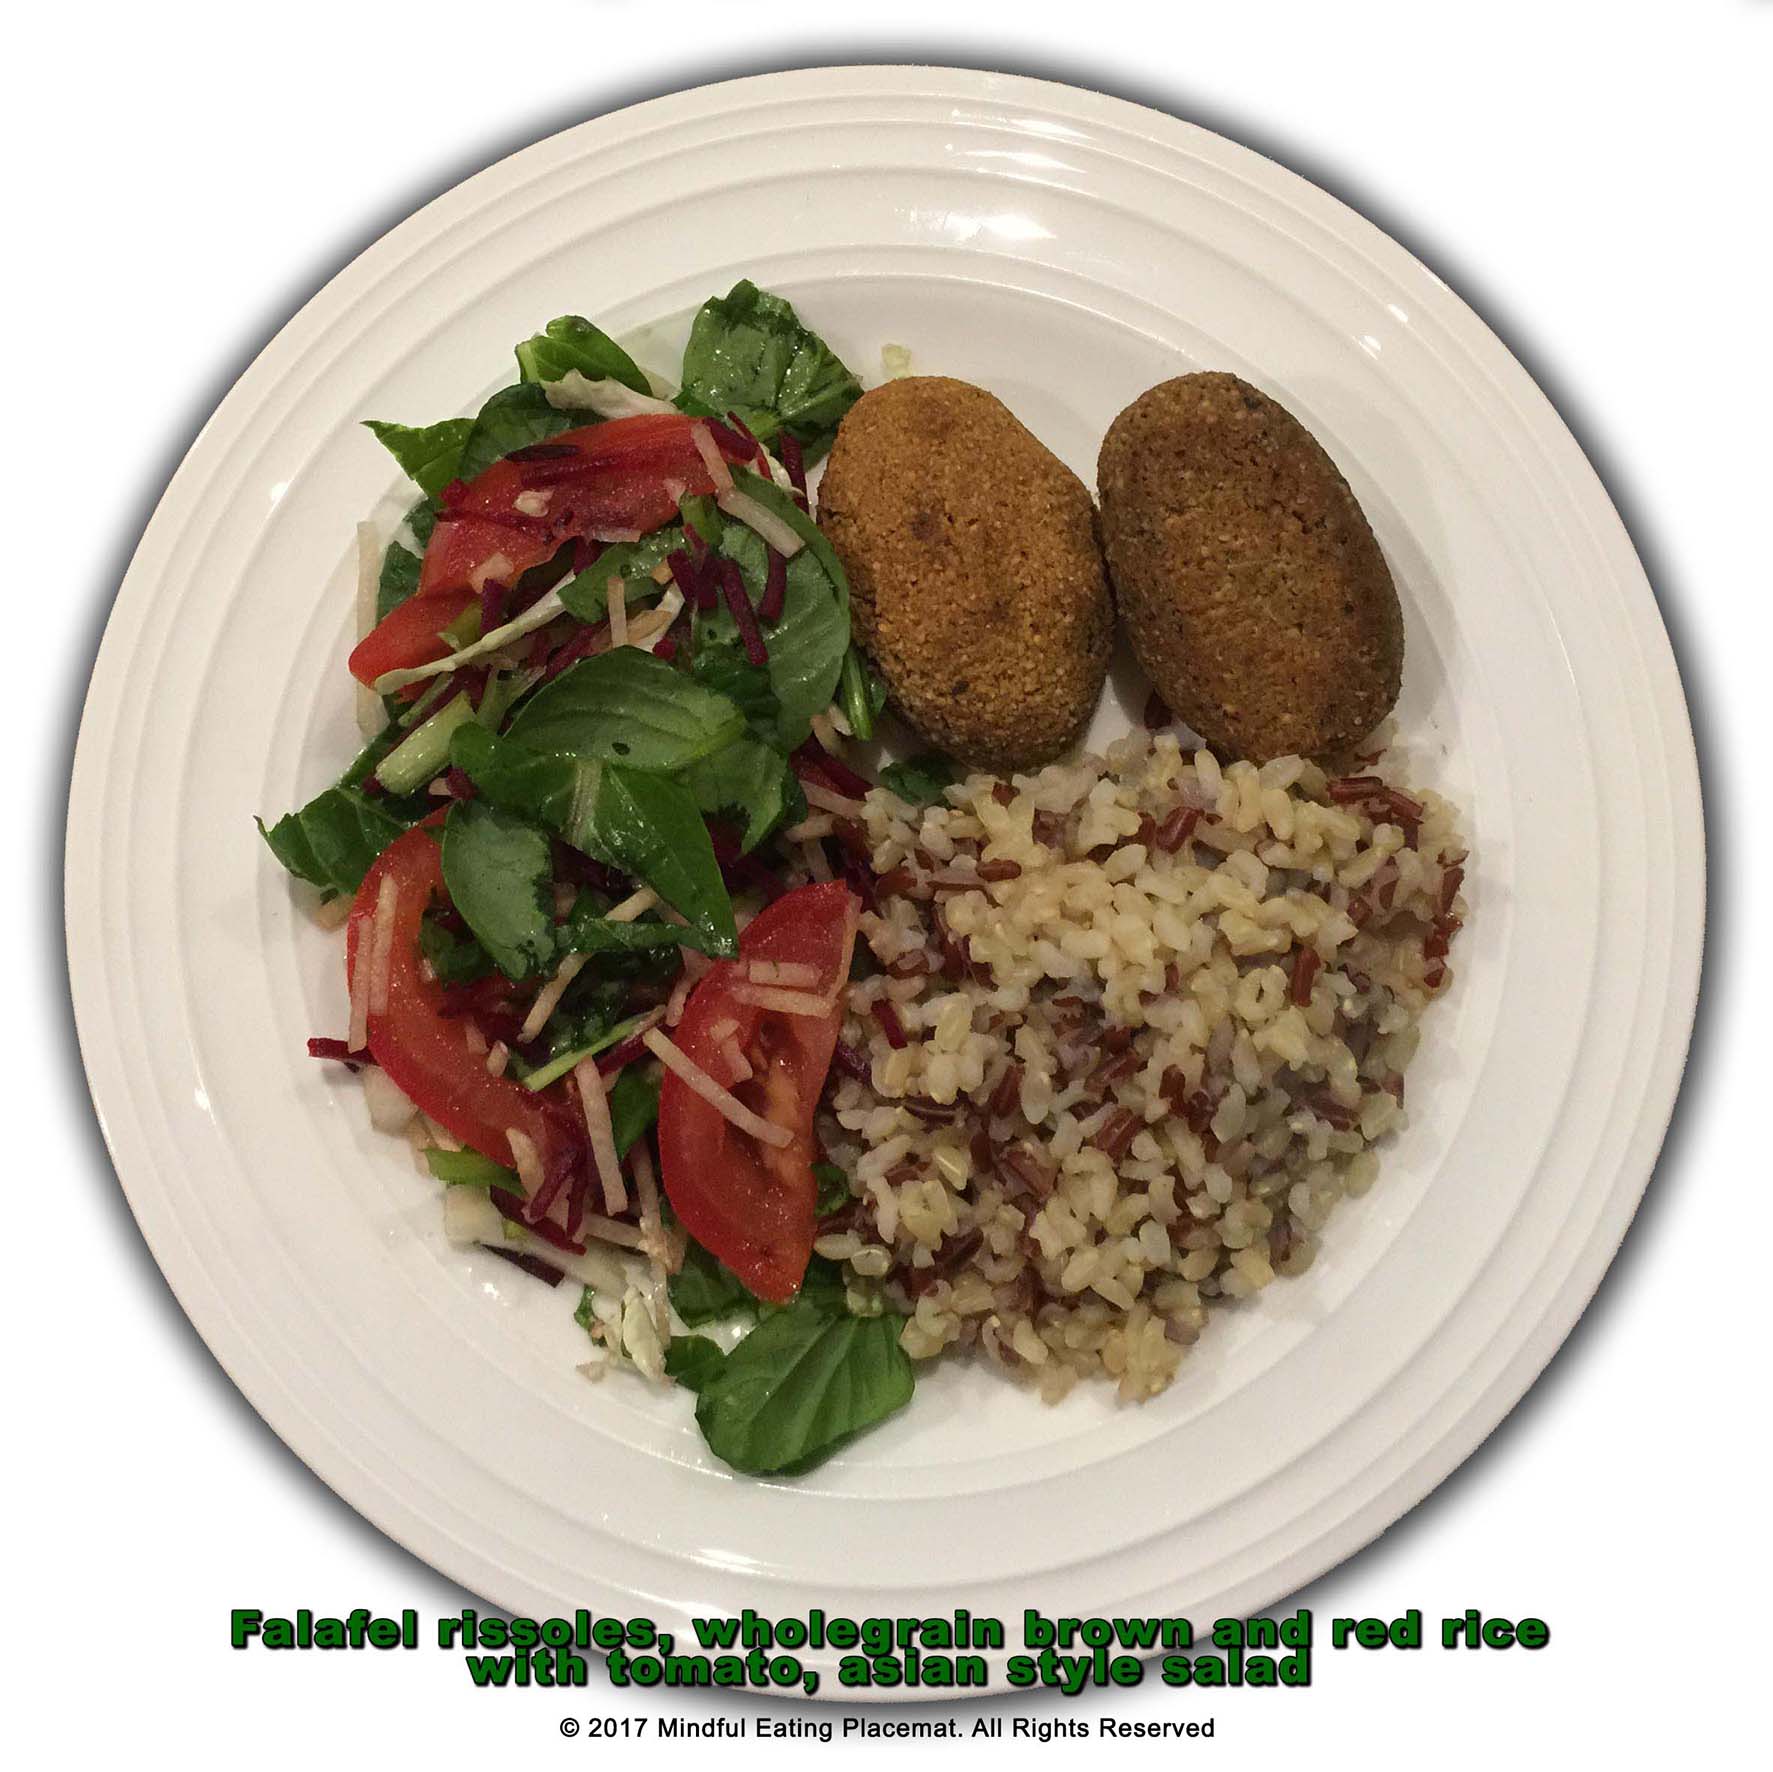 Falafel with brown and red rice with a green salad